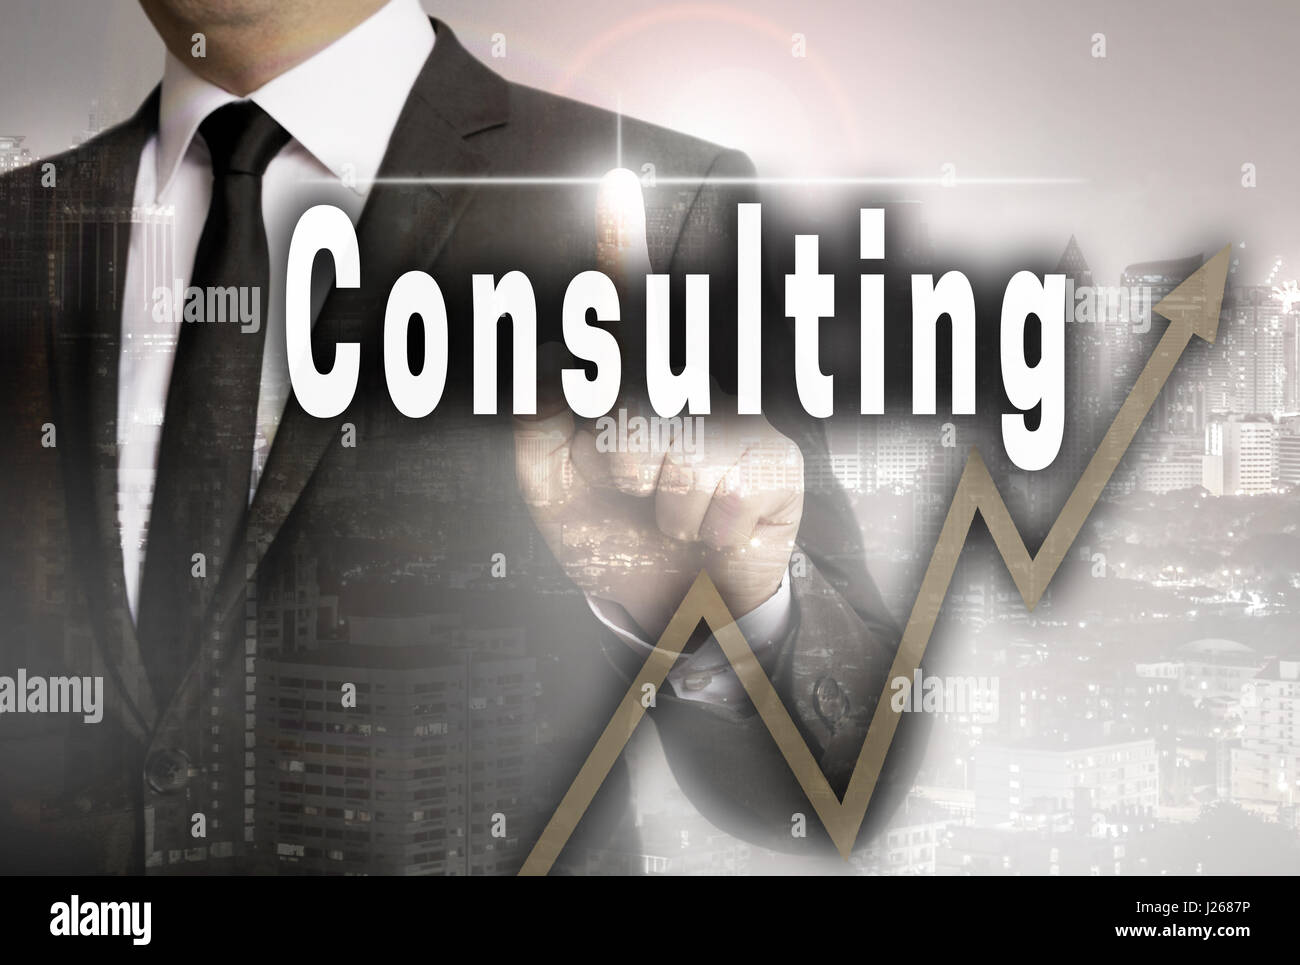 Consulting is shown by businessman concept. Stock Photo